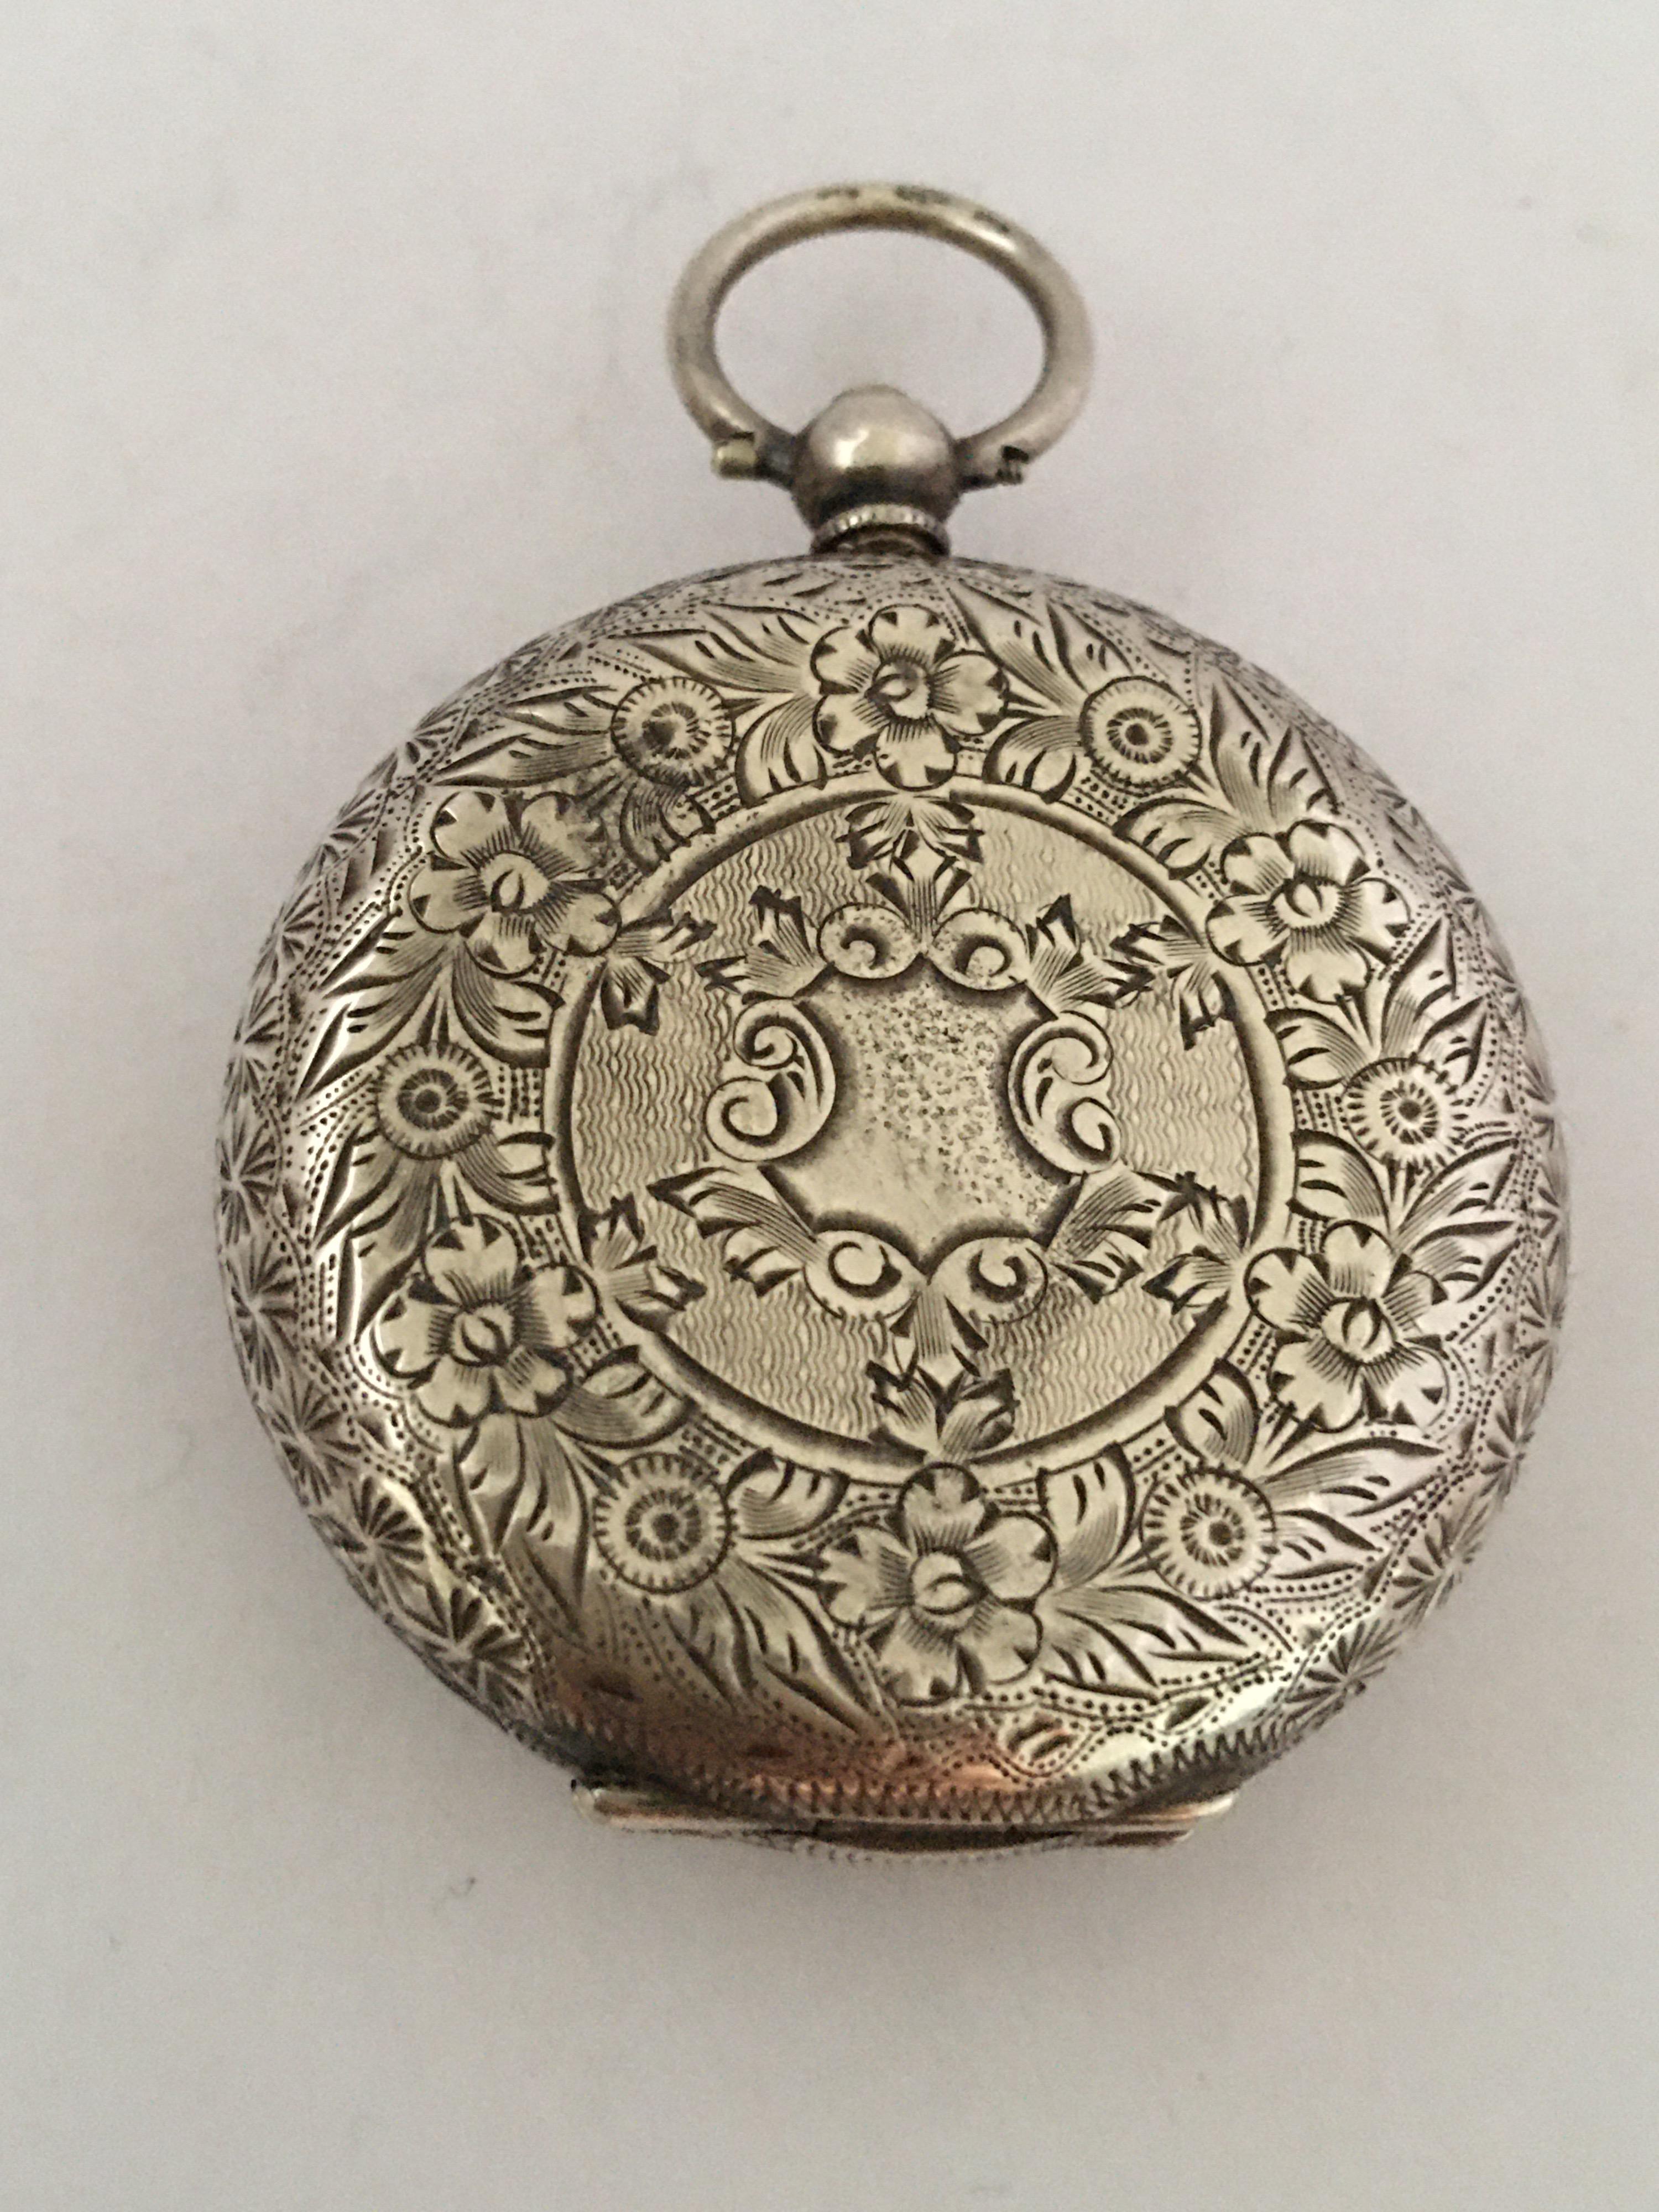 This small and beautiful antique Victorian period with its pink enamel dial pocket watch is in good working condition and it is ticking well. It comes with a key and it’s tiny swede pouch. 

